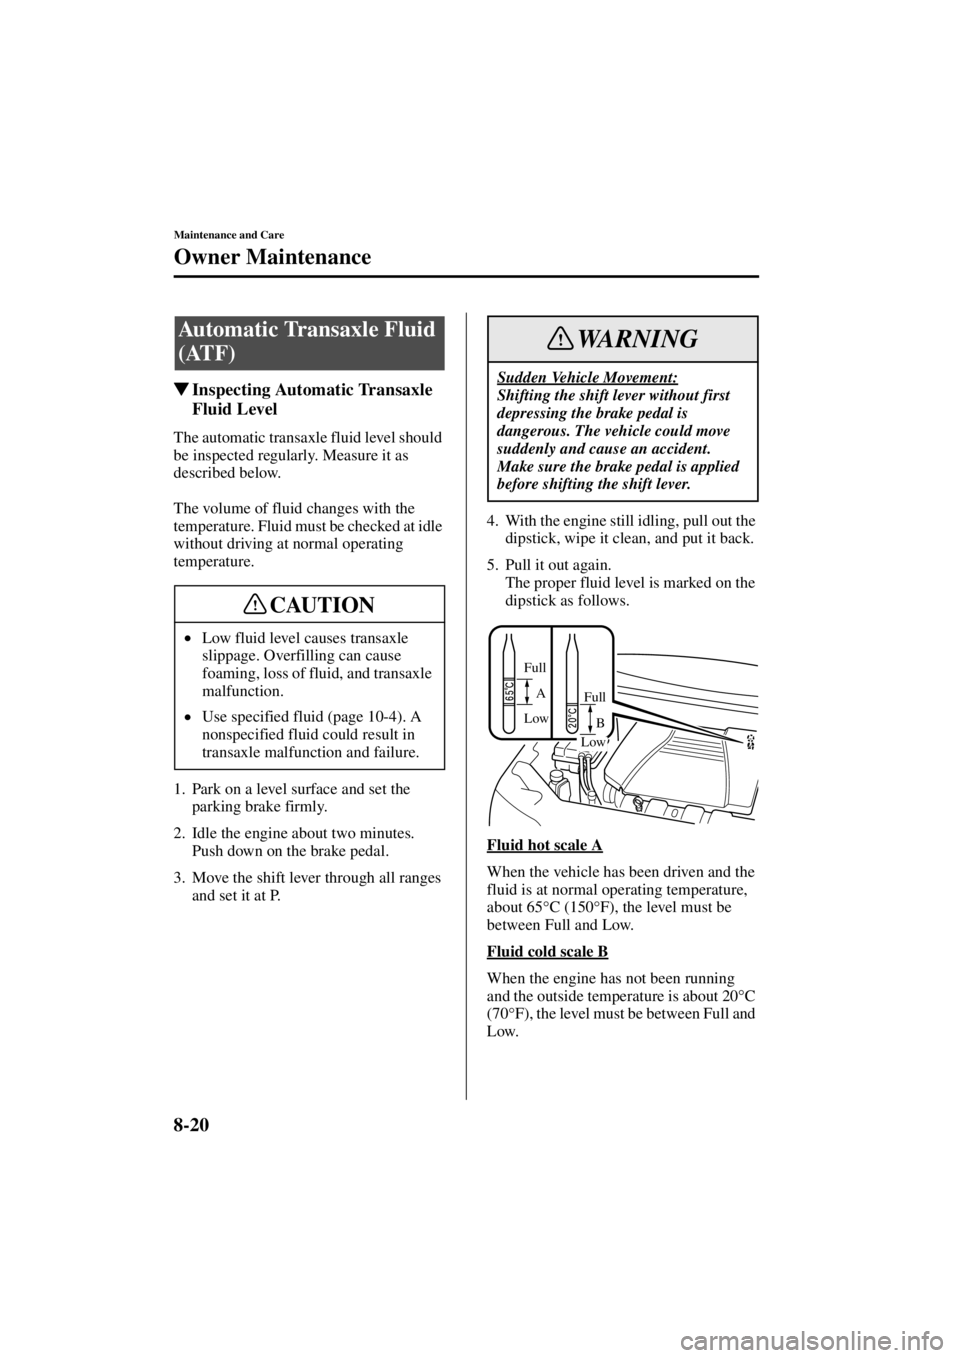 MAZDA MODEL 3 5-DOOR 2004  Owners Manual 8-20
Maintenance and Care
Owner Maintenance
Form No. 8S18-EA-03I
Inspecting Automatic Transaxle 
Fluid Level
The automatic transaxle fluid level should 
be inspected regularly. Measure it as 
describ